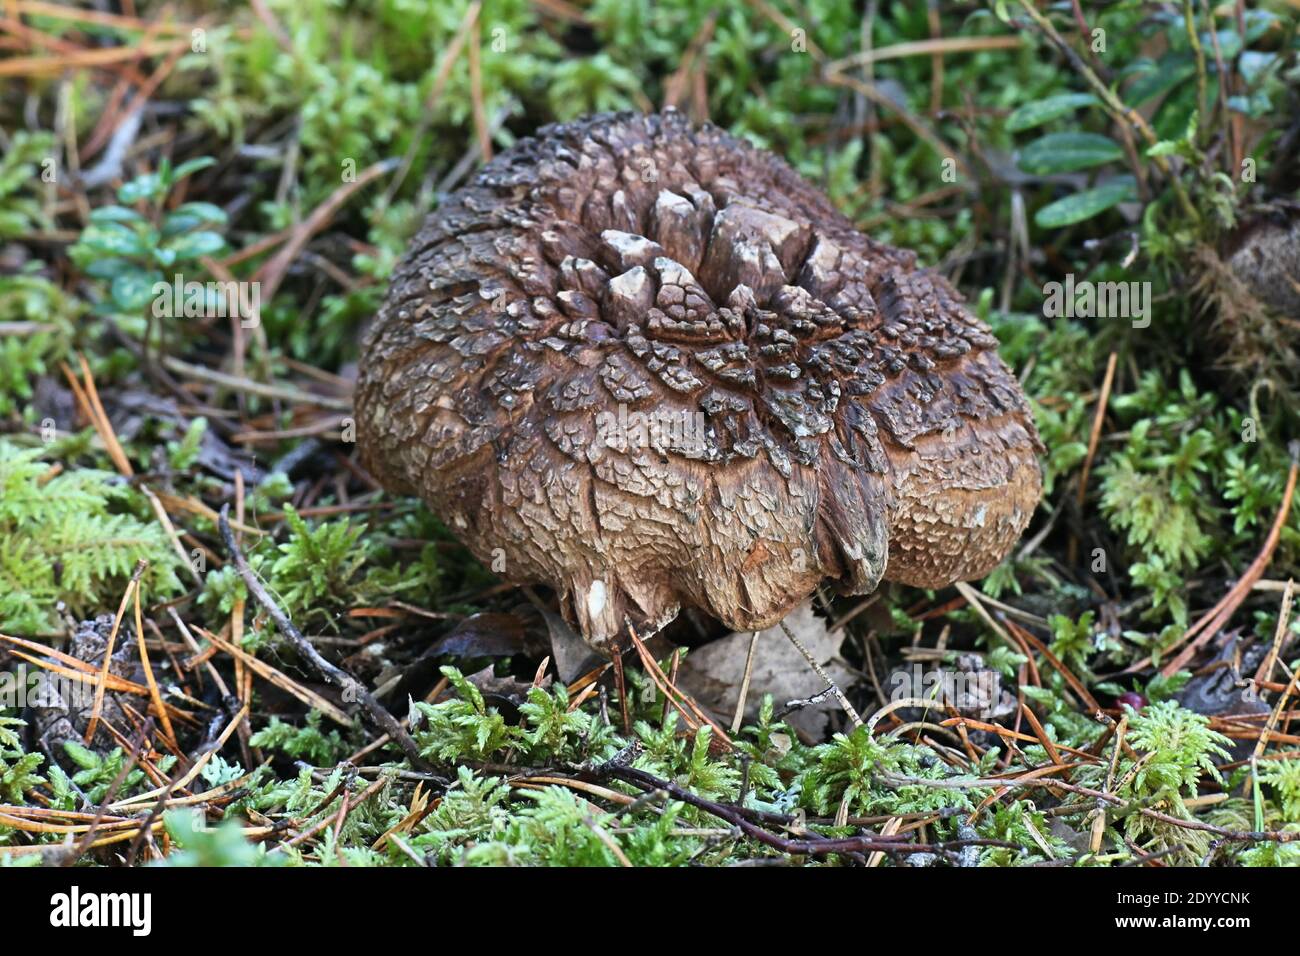 Sarcodon aff.  scabrosus, known as Bitter Tooth fungus, wild mushroom from Finland Stock Photo